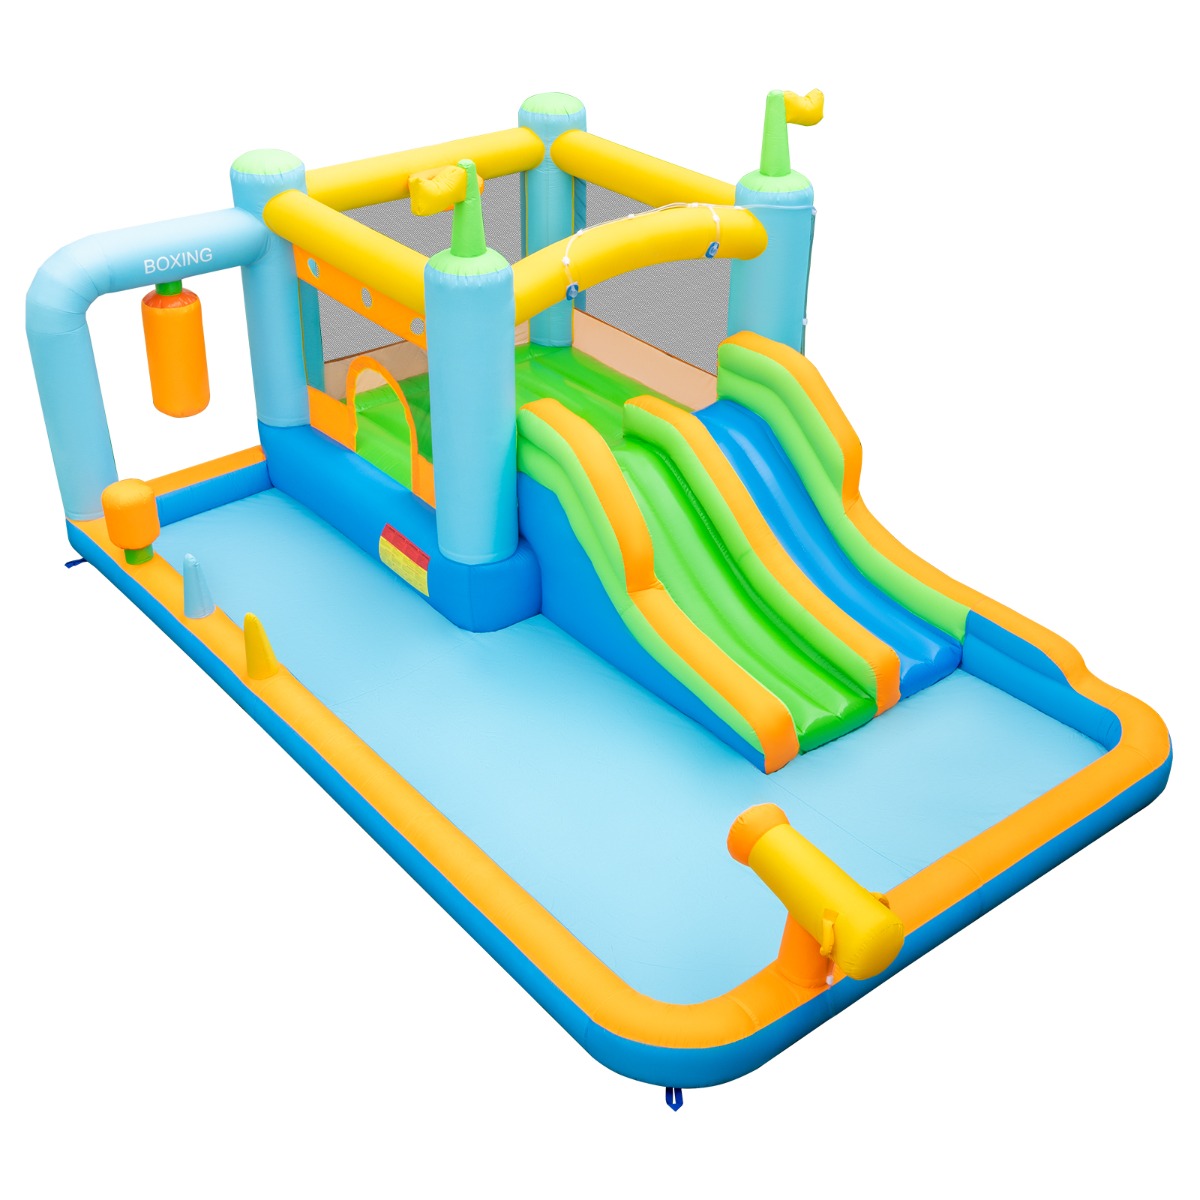 Inflatable Bounce House with Dual Slides for Kids